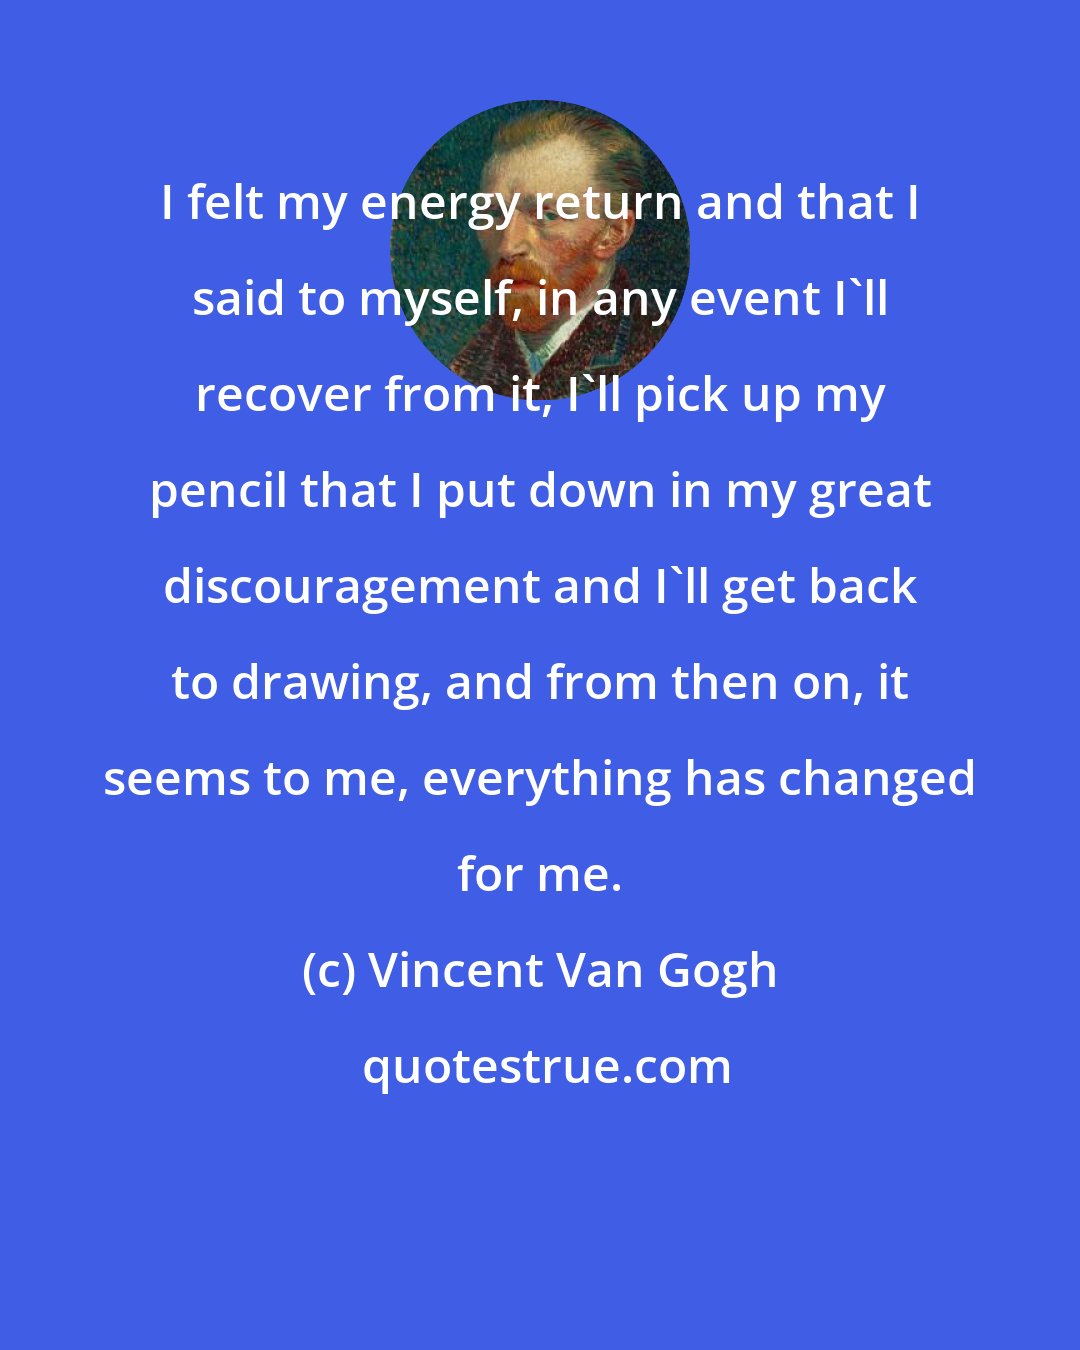 Vincent Van Gogh: I felt my energy return and that I said to myself, in any event I'll recover from it, I'll pick up my pencil that I put down in my great discouragement and I'll get back to drawing, and from then on, it seems to me, everything has changed for me.